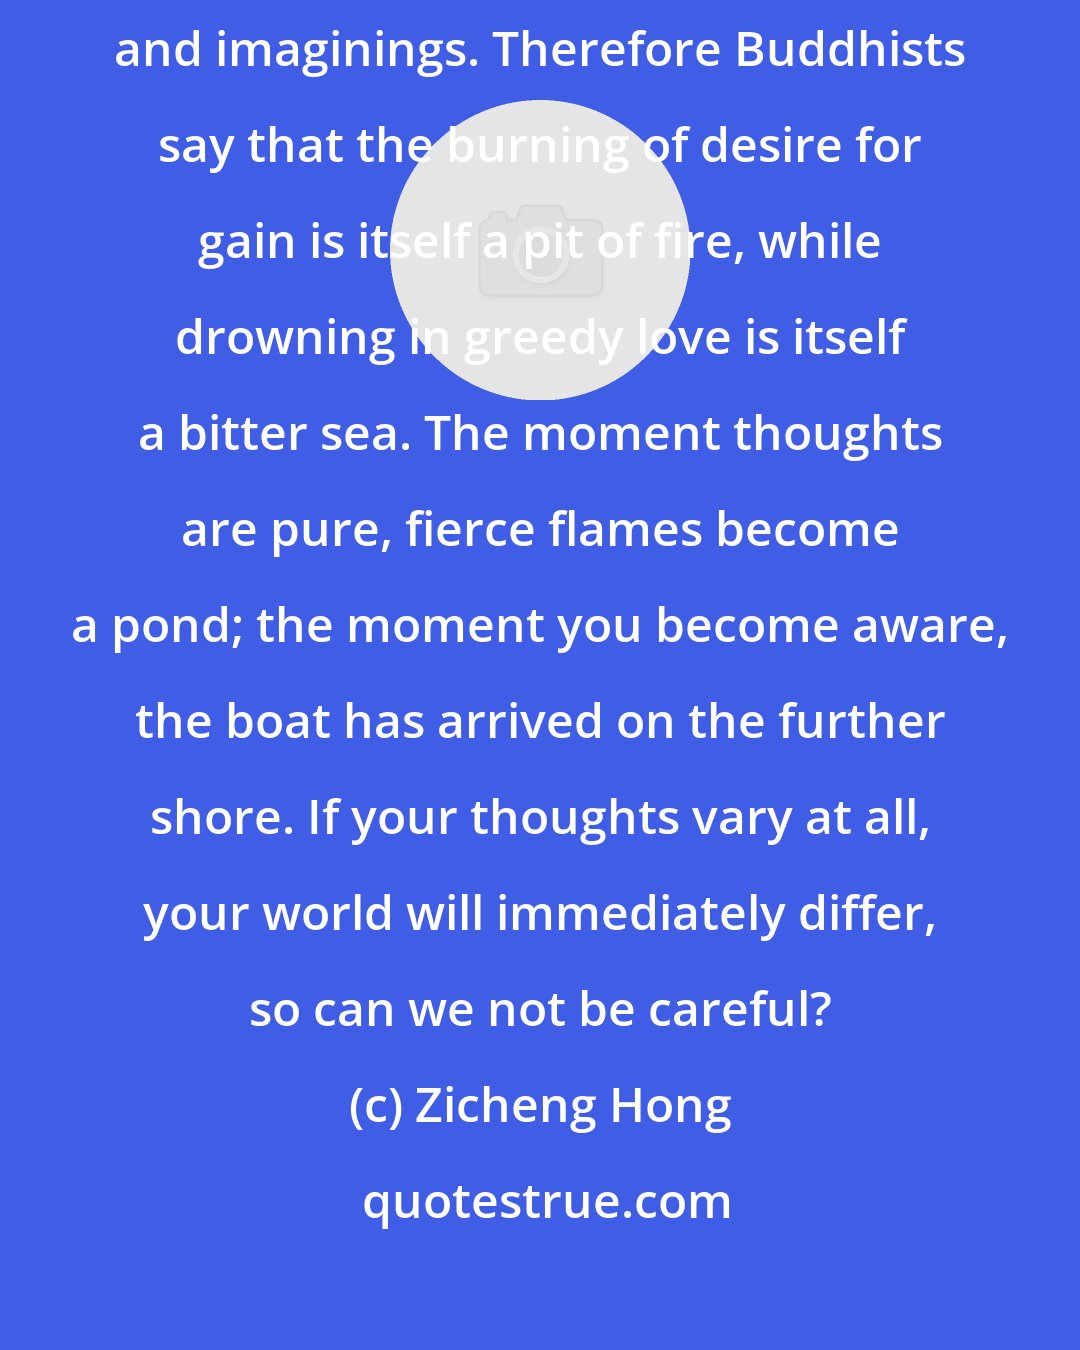 Zicheng Hong: The realms of good fortune and calamity in human life are all made of thoughts and imaginings. Therefore Buddhists say that the burning of desire for gain is itself a pit of fire, while drowning in greedy love is itself a bitter sea. The moment thoughts are pure, fierce flames become a pond; the moment you become aware, the boat has arrived on the further shore. If your thoughts vary at all, your world will immediately differ, so can we not be careful?